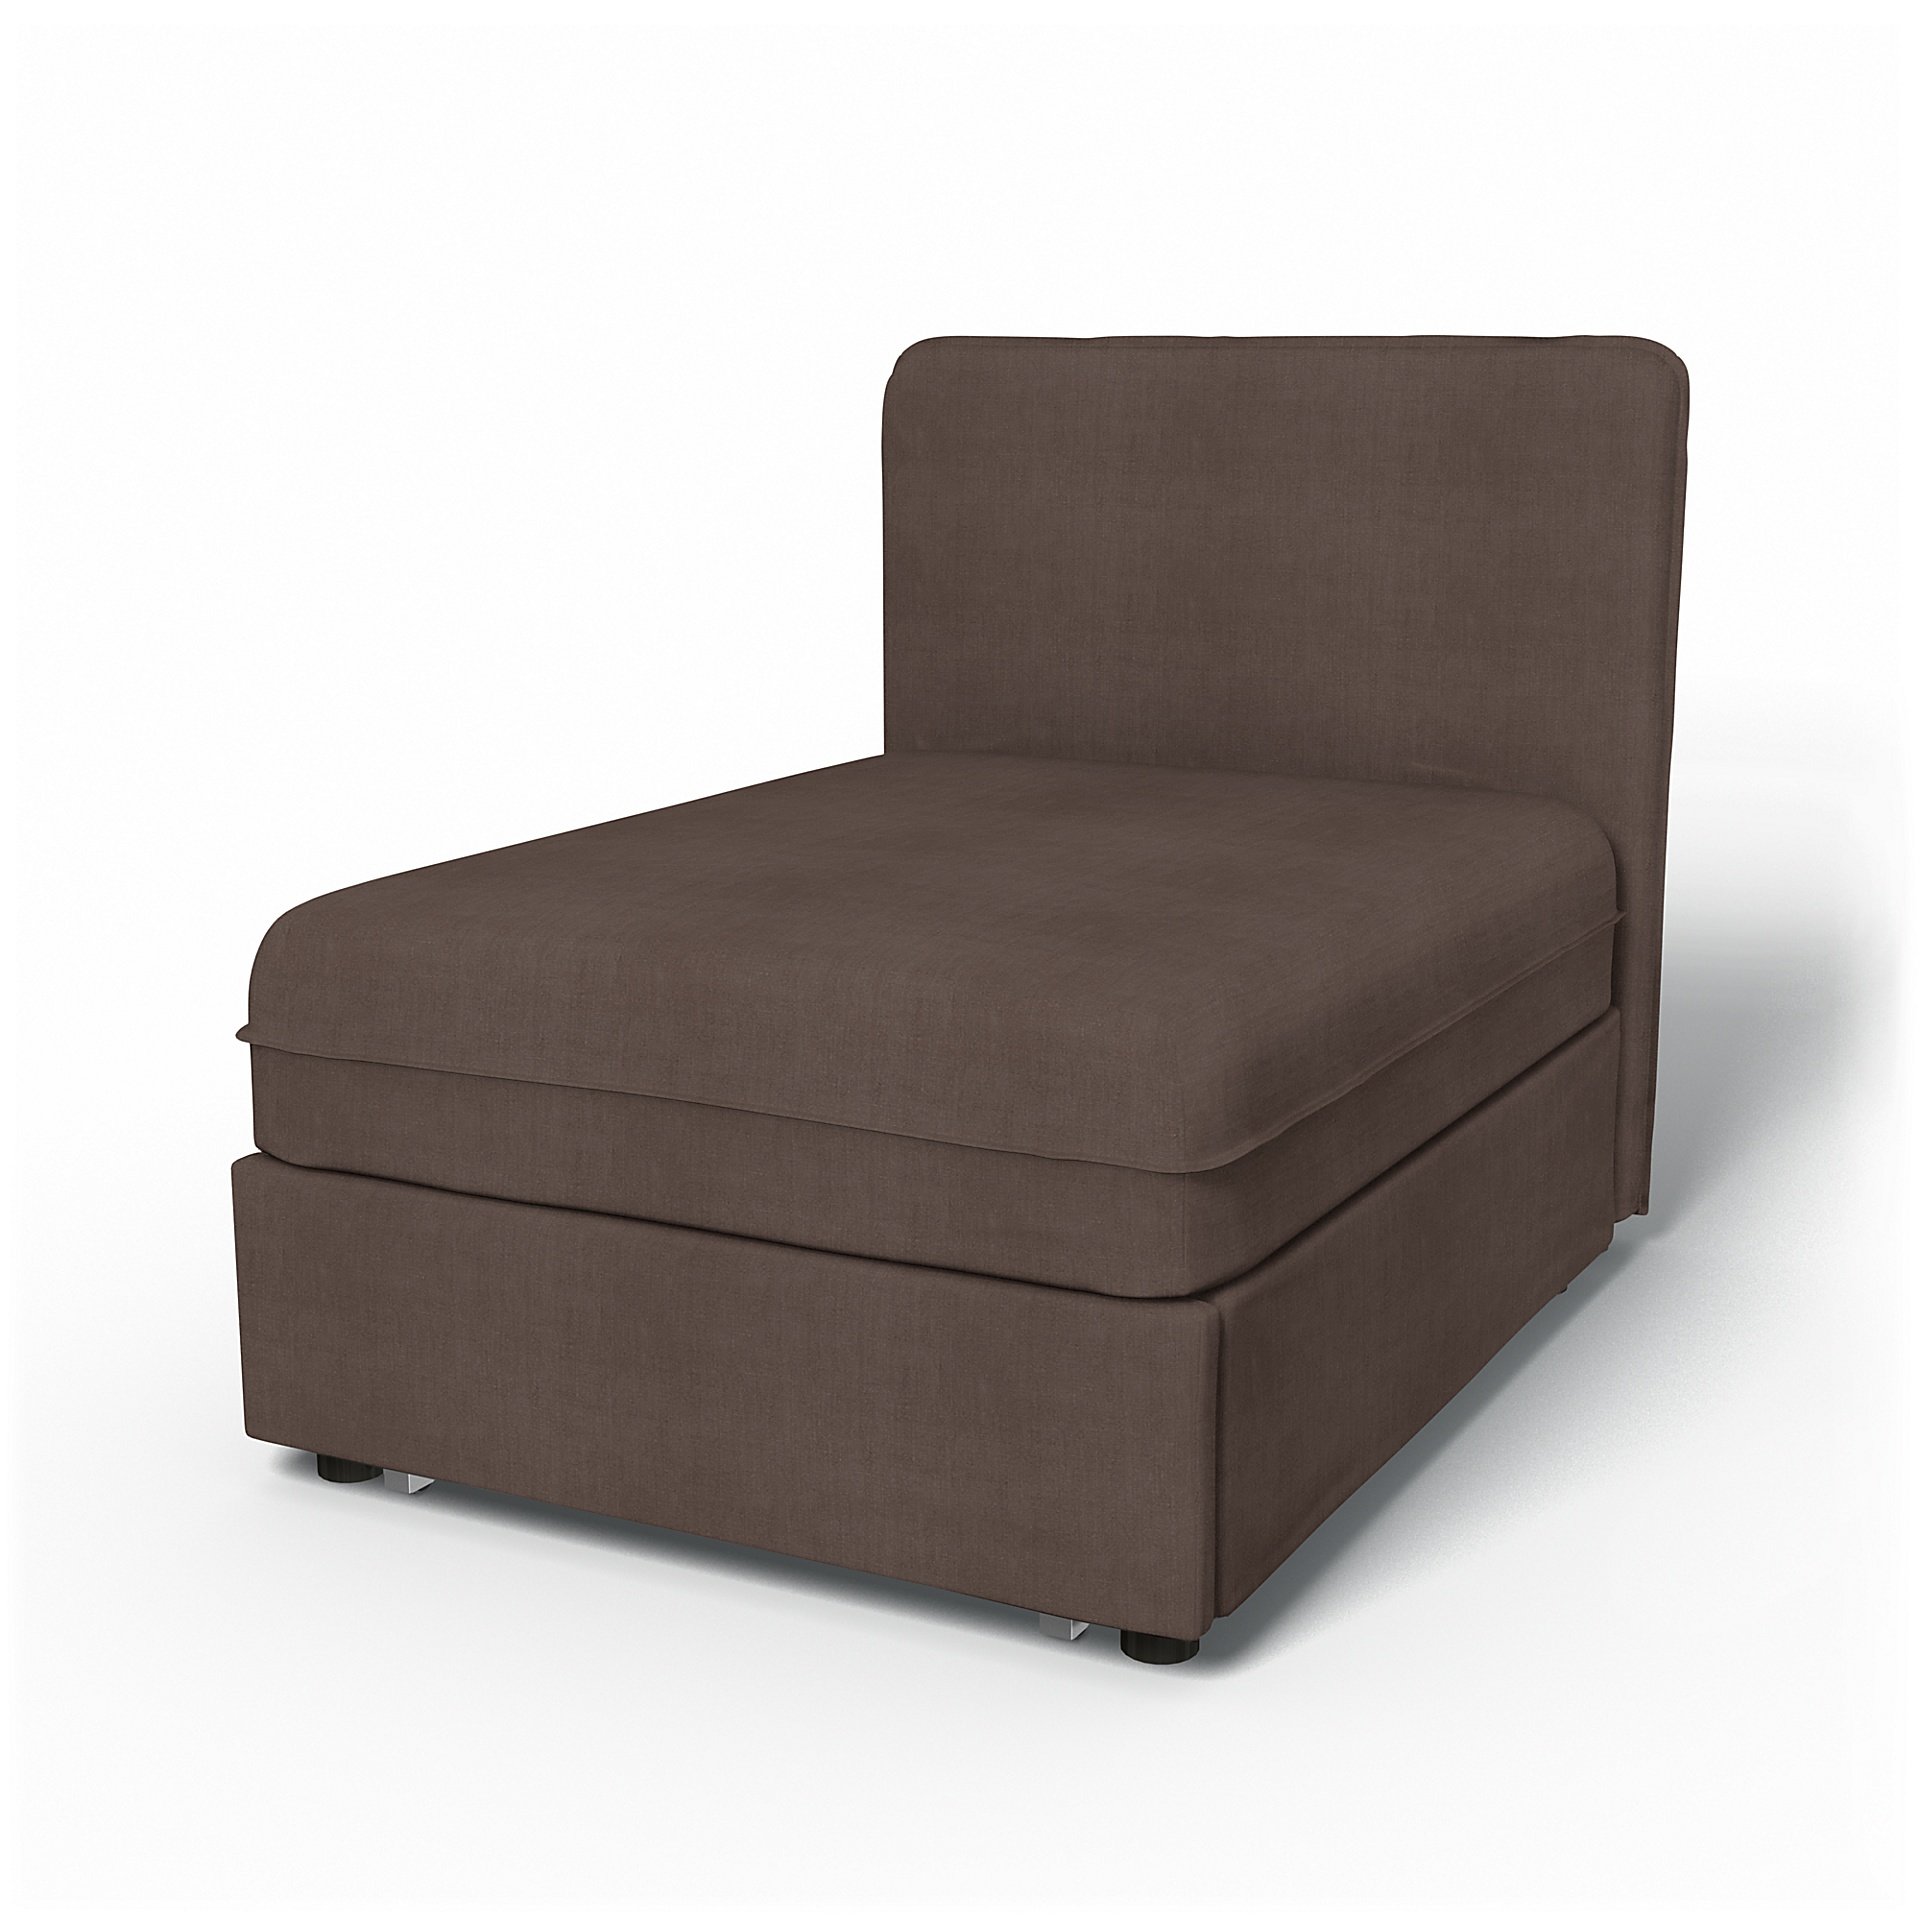 IKEA - Vallentuna Seat Module with Low Back Sofa Bed Cover 80x100 cm 32x39in, Cocoa, Linen - Bemz